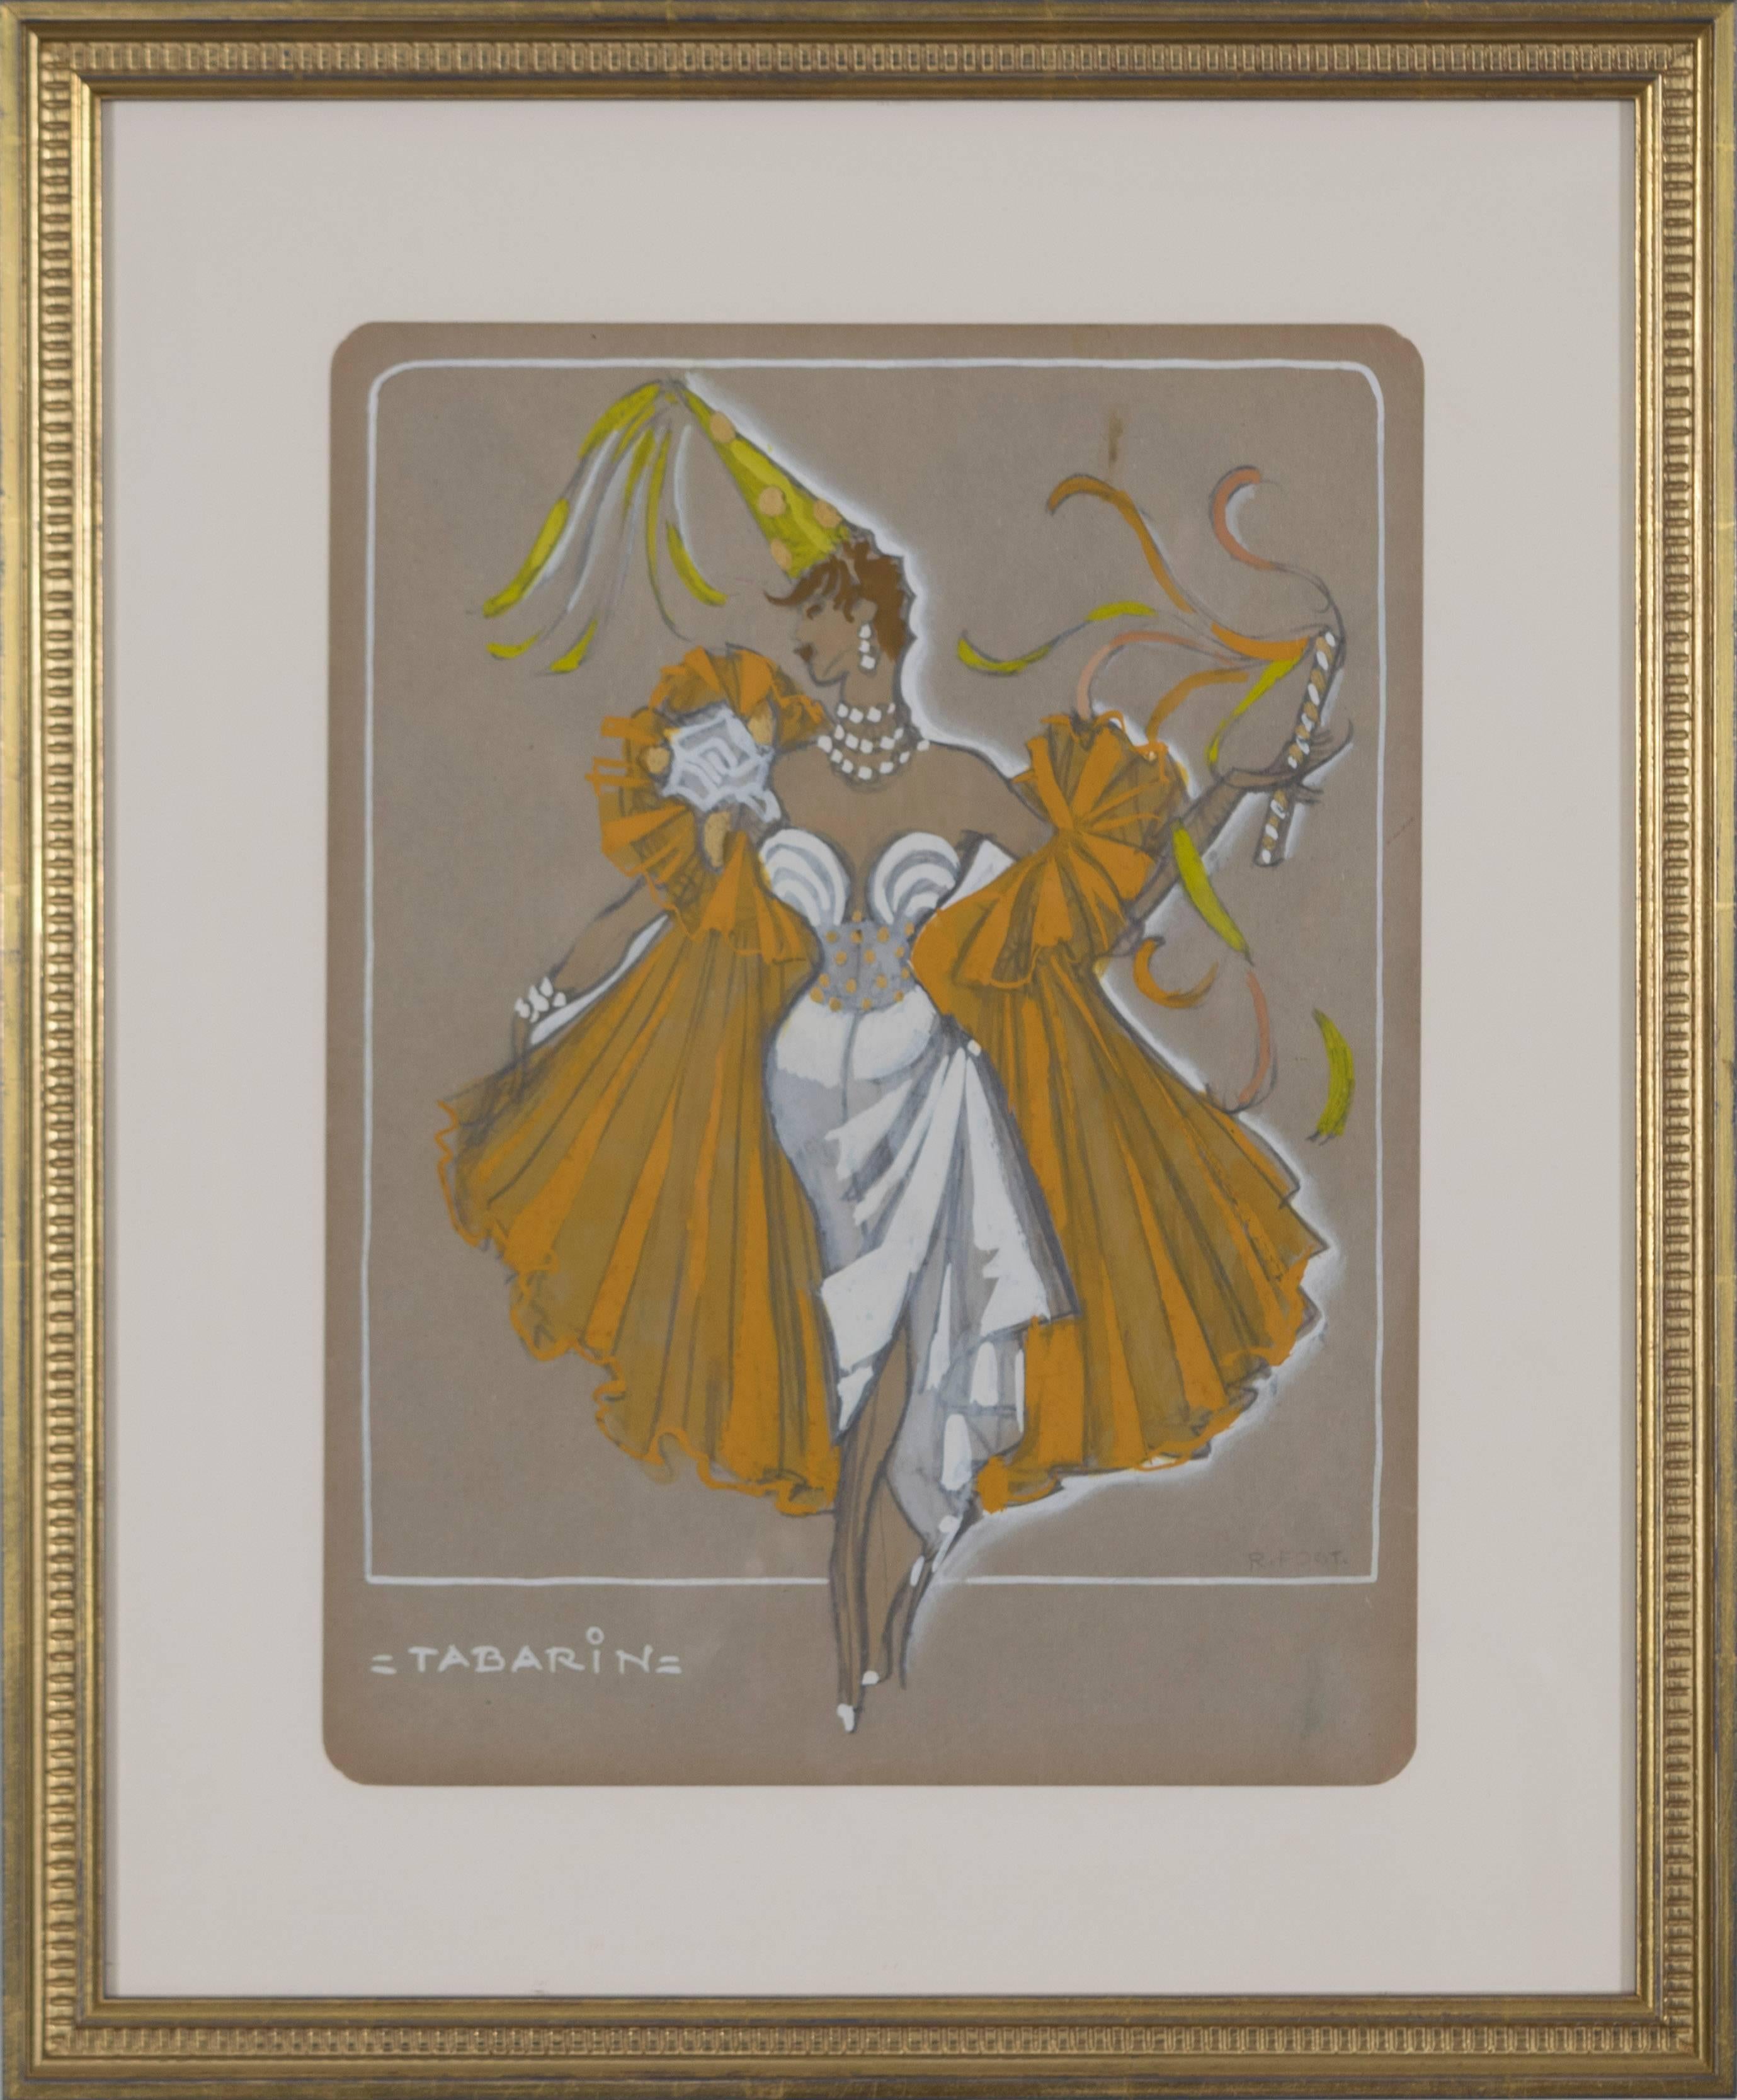 "Tabarin, " An Original French Costume Design by H. R. Fost, circa 1940s - Art by H.R. Fost